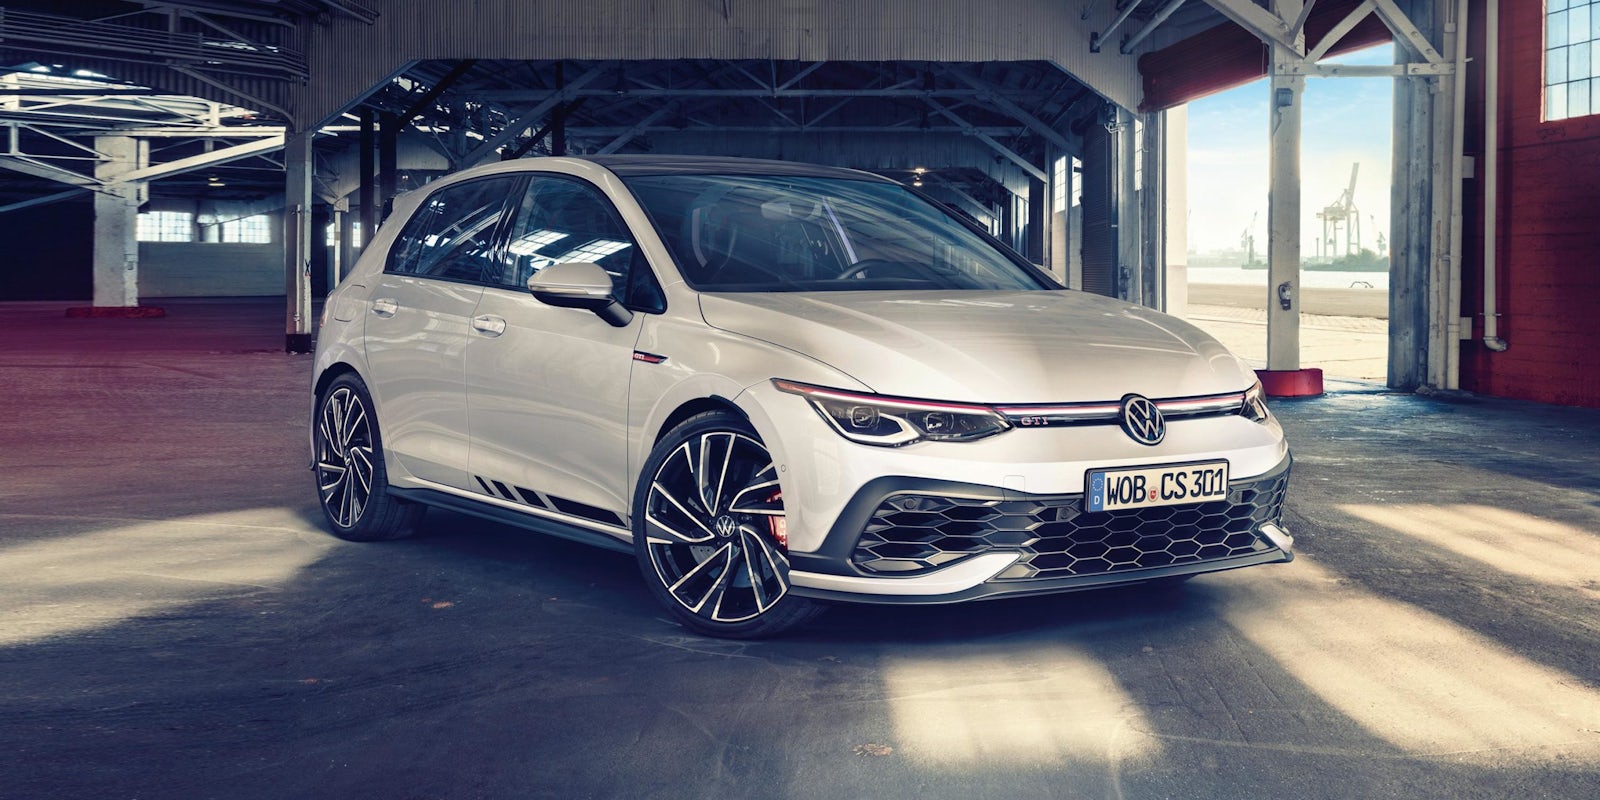 Premisse Cokes span New 300hp VW Golf GTI Clubsport on sale now: price and specs revealed |  carwow